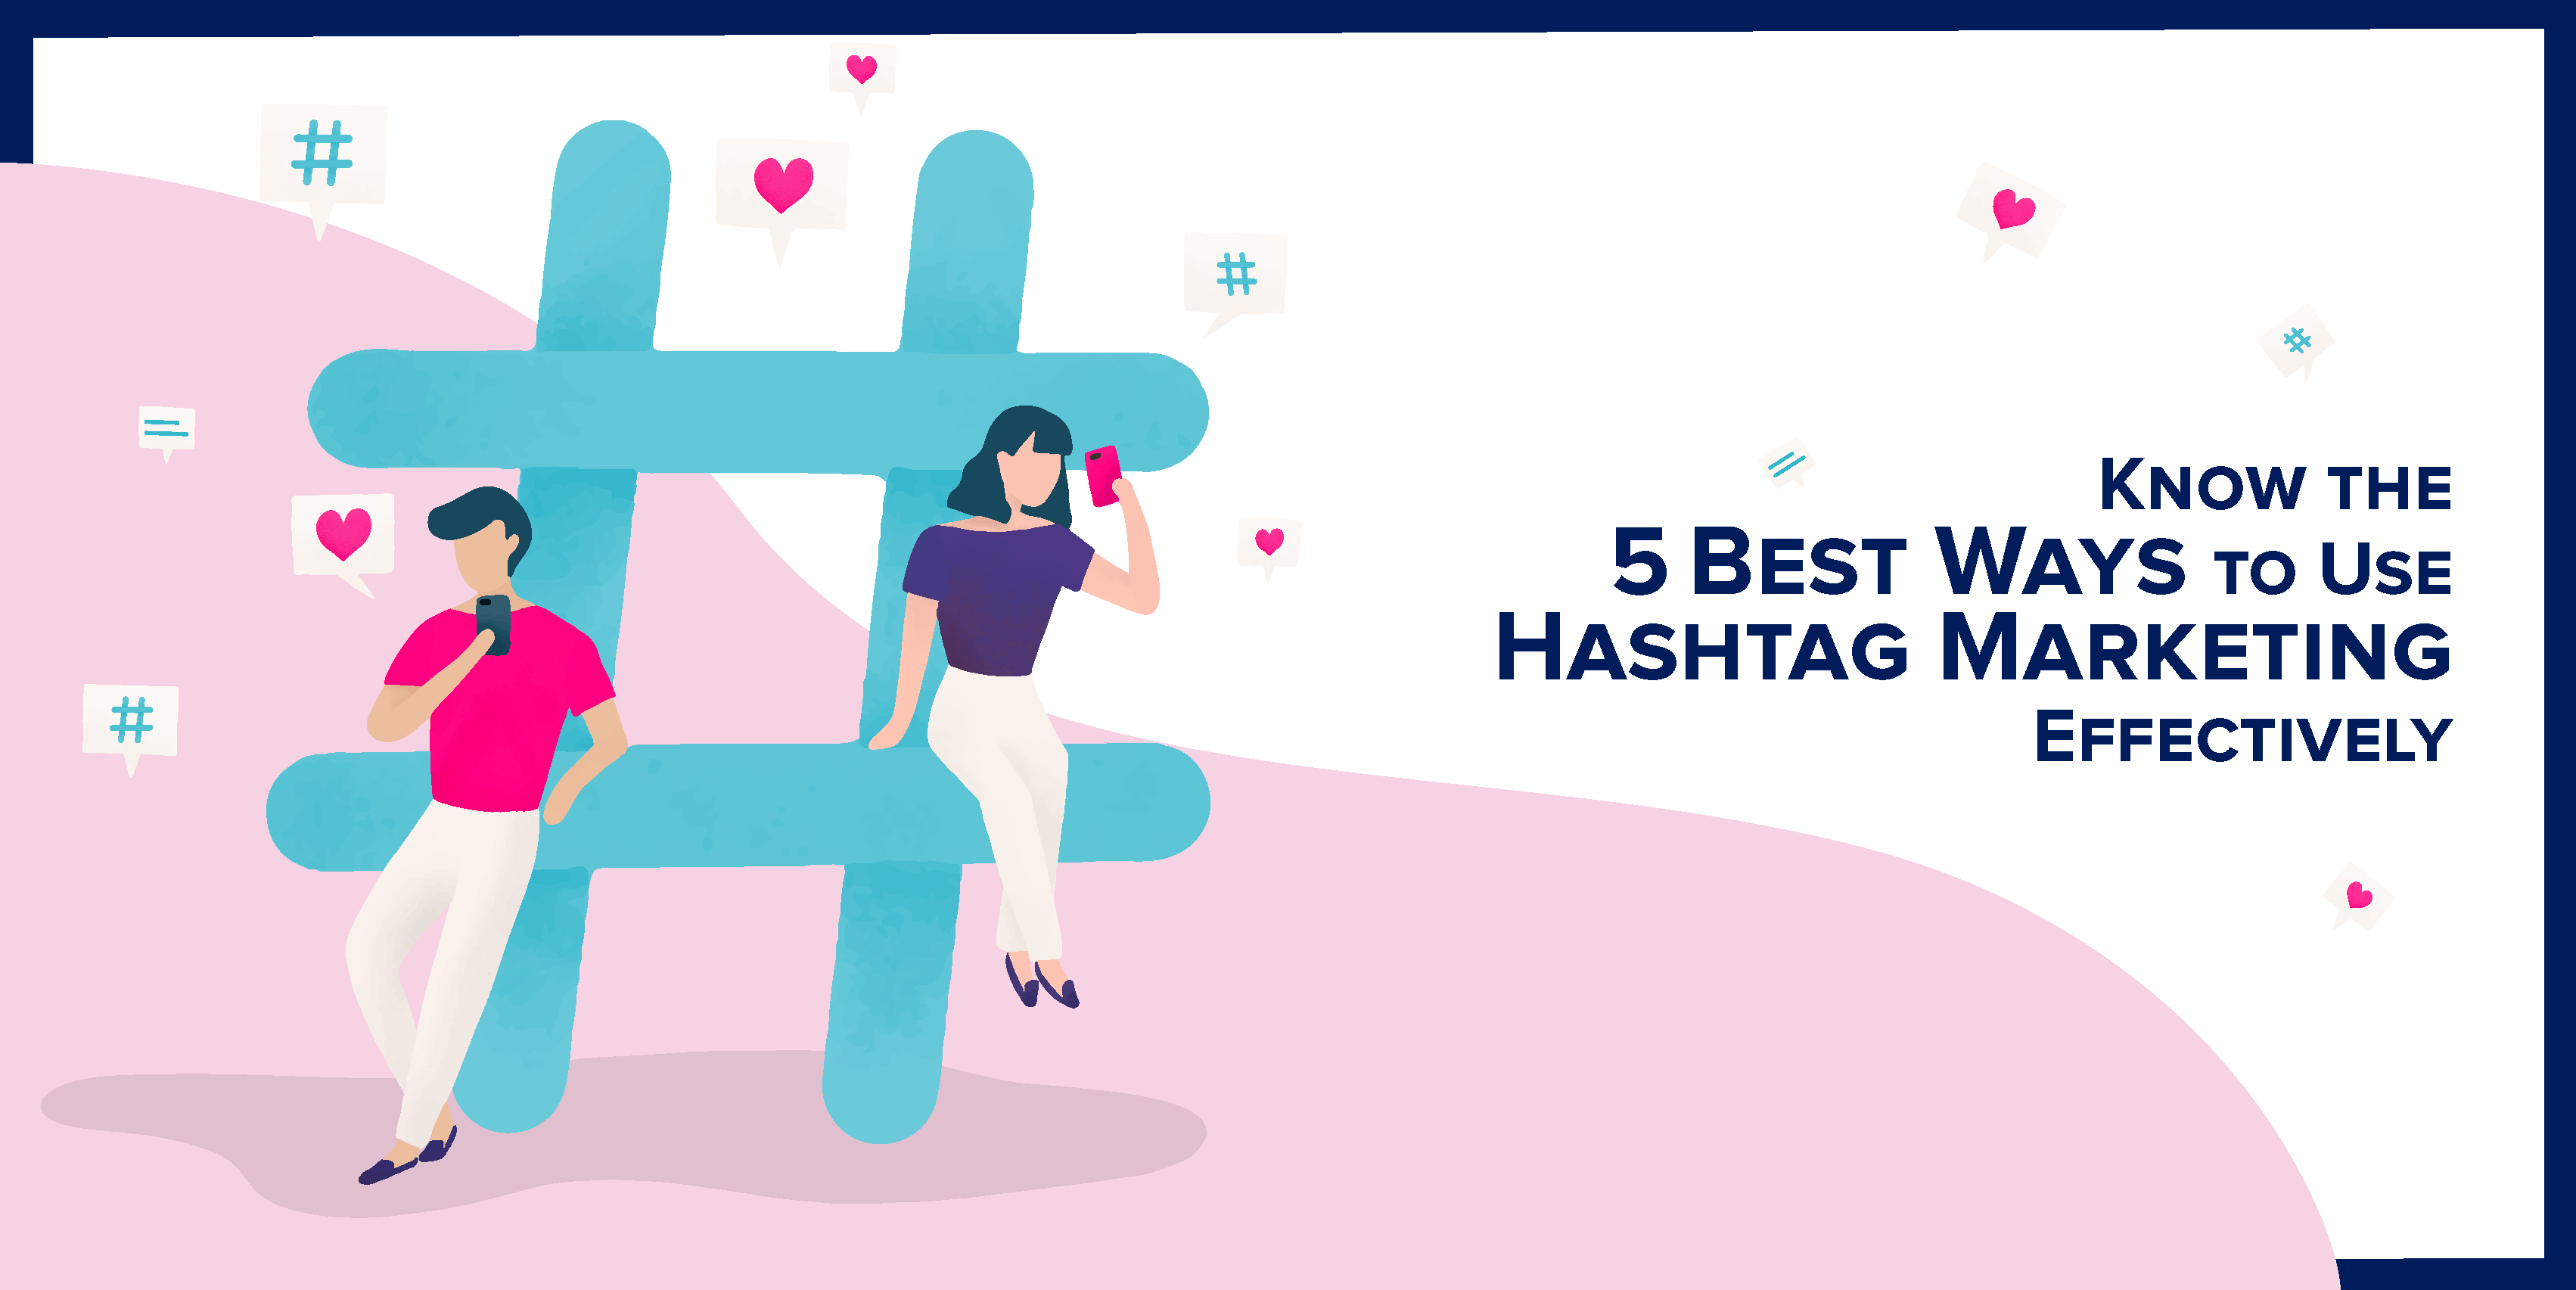 Know the 5 Best Ways to Use Hashtag Marketing Effectively